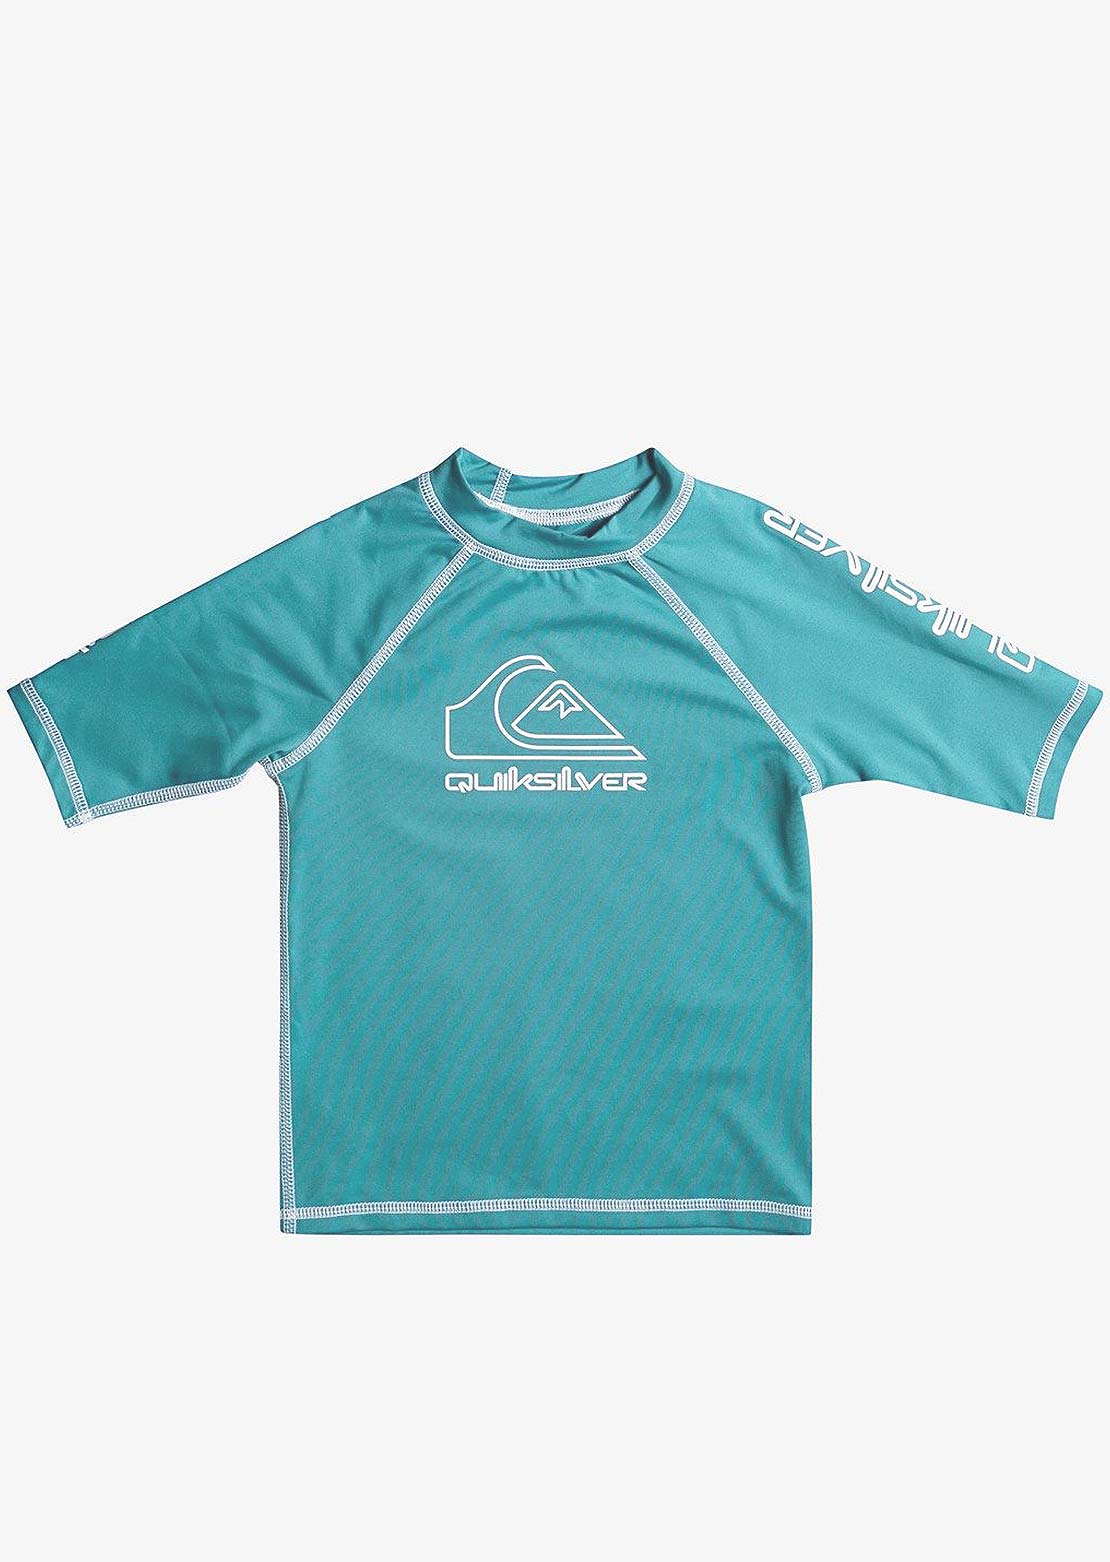 Quiksilver Toddler On Tour SS Rashguards Brittany Blue